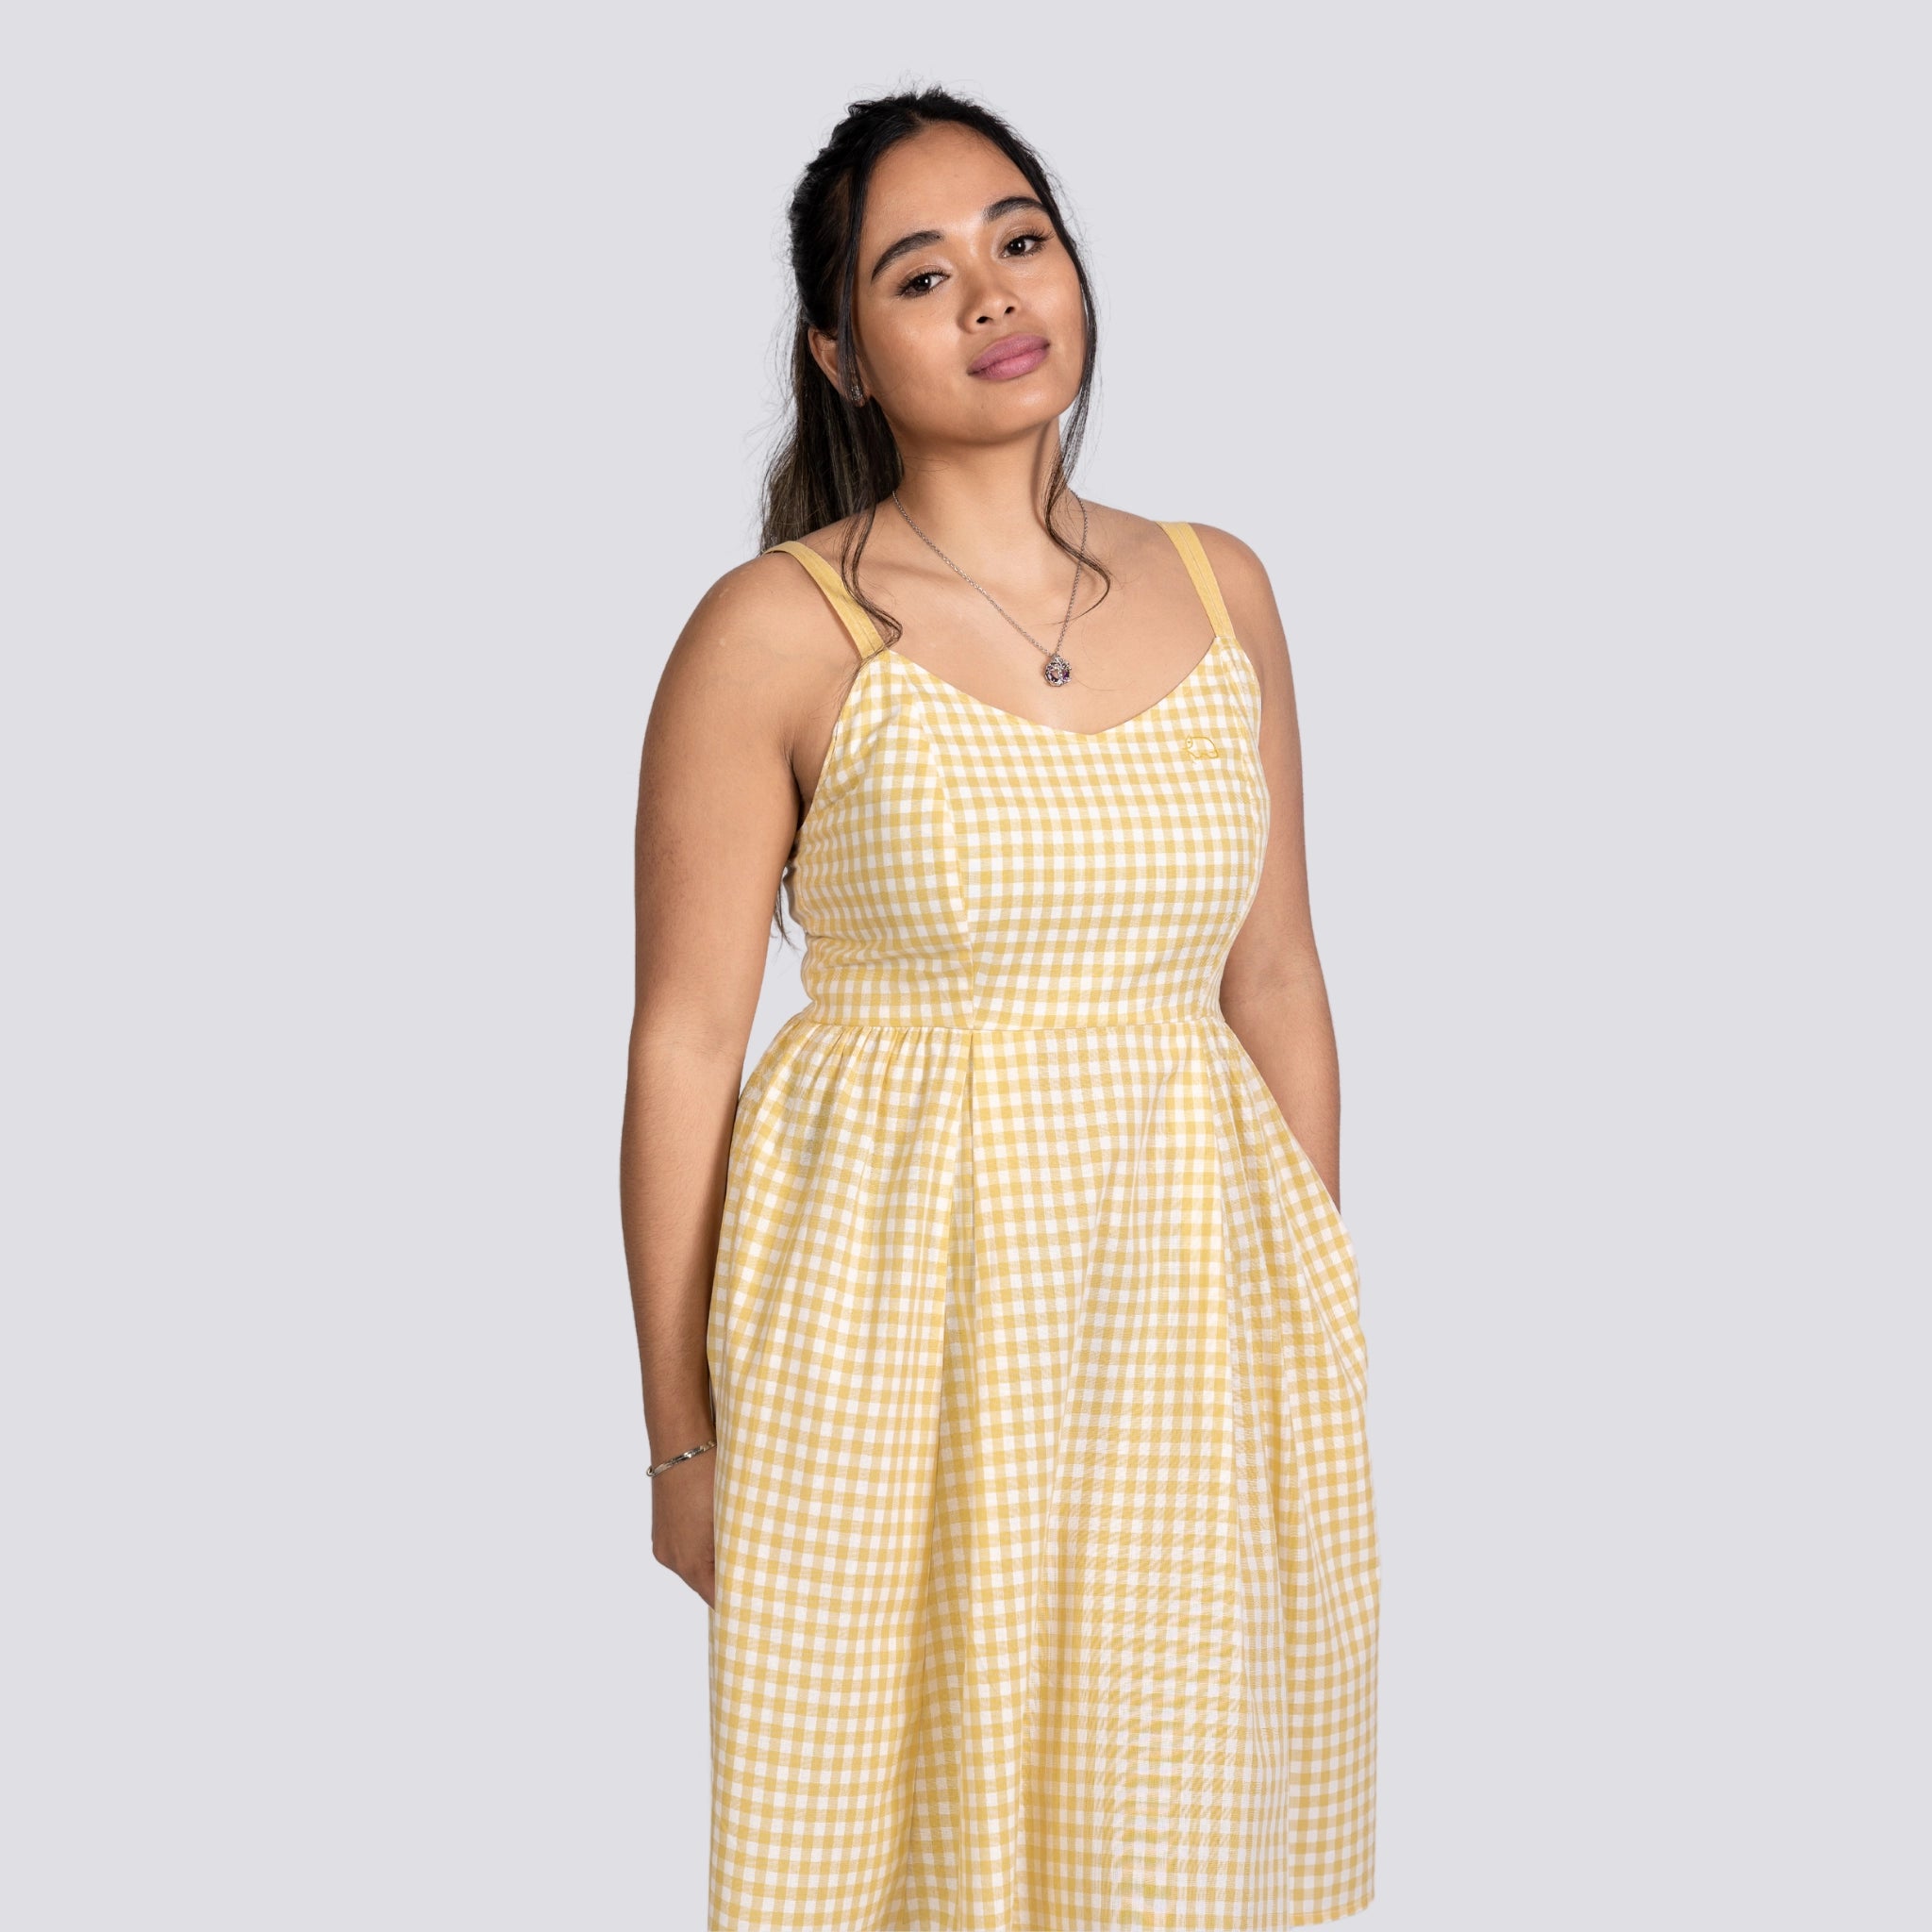 Woman standing against a gray background, wearing a Karee Sunshine Chic Yellow Plaid Cotton Mini Dress and a pendant necklace, looking slightly to the side.